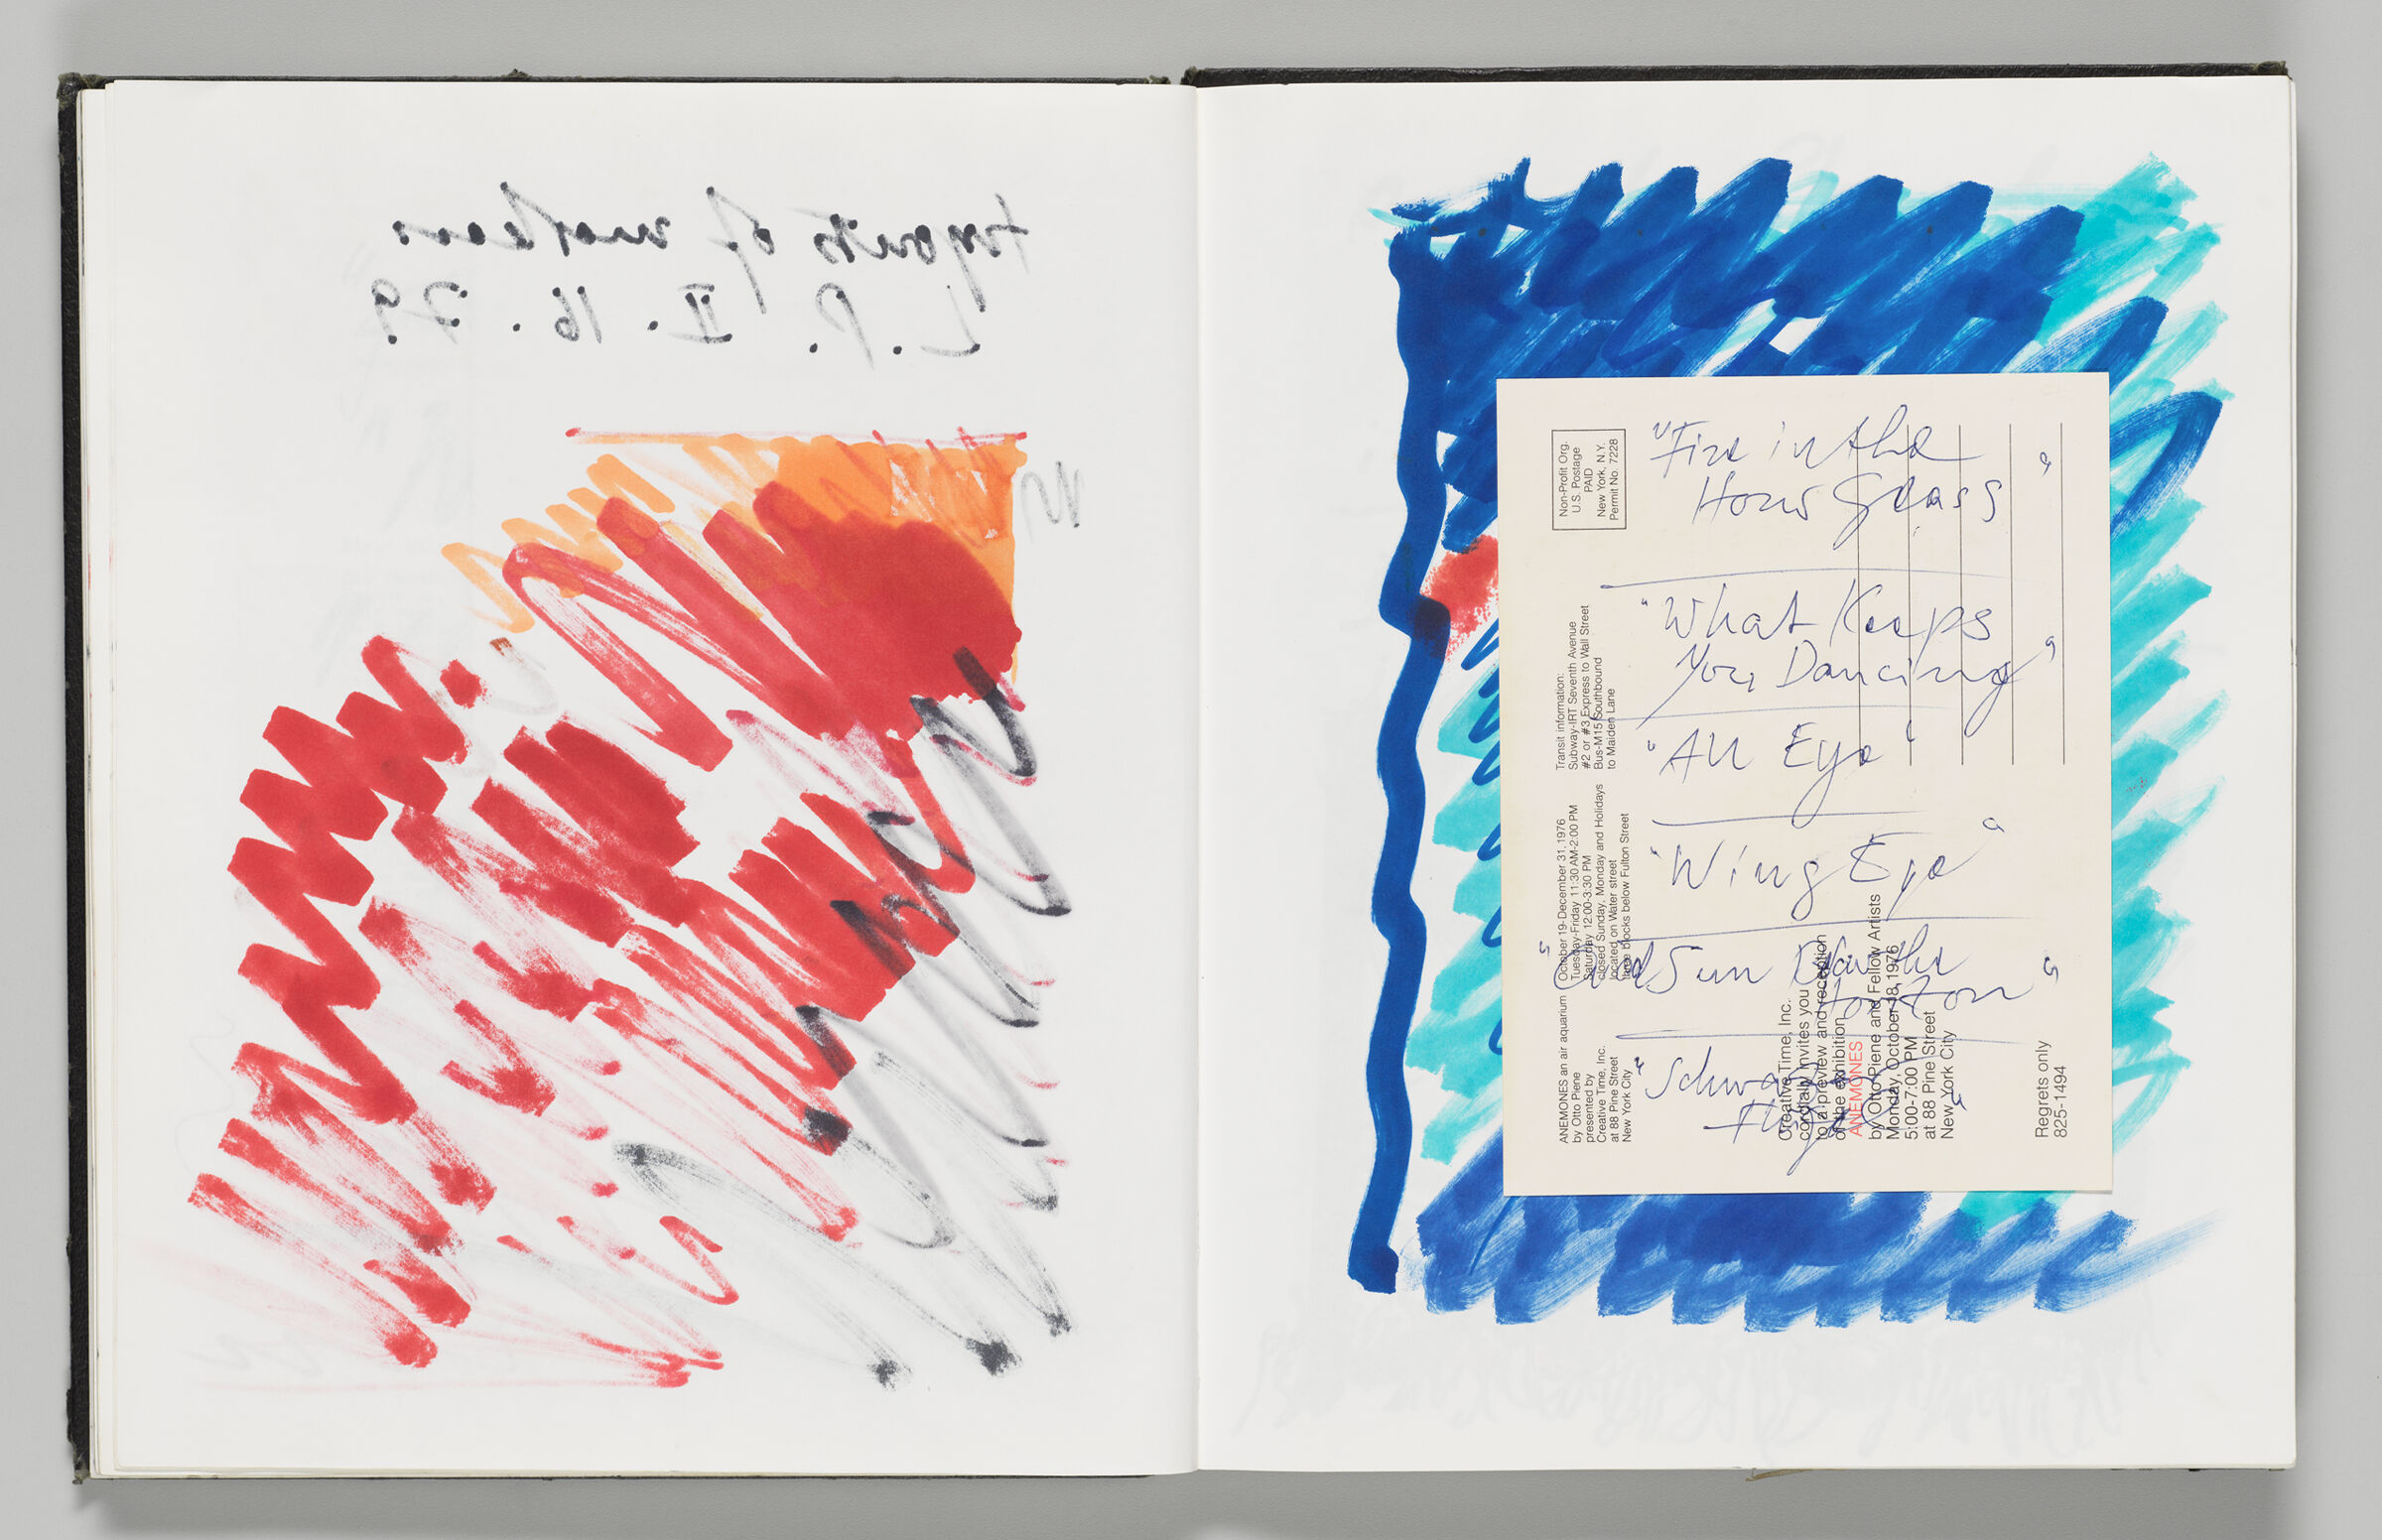 Untitled (Bleed-Through Of Previous Page, Left Page); Untitled (Notes On Work Titles On Adhered Invitation Card, Right Page)